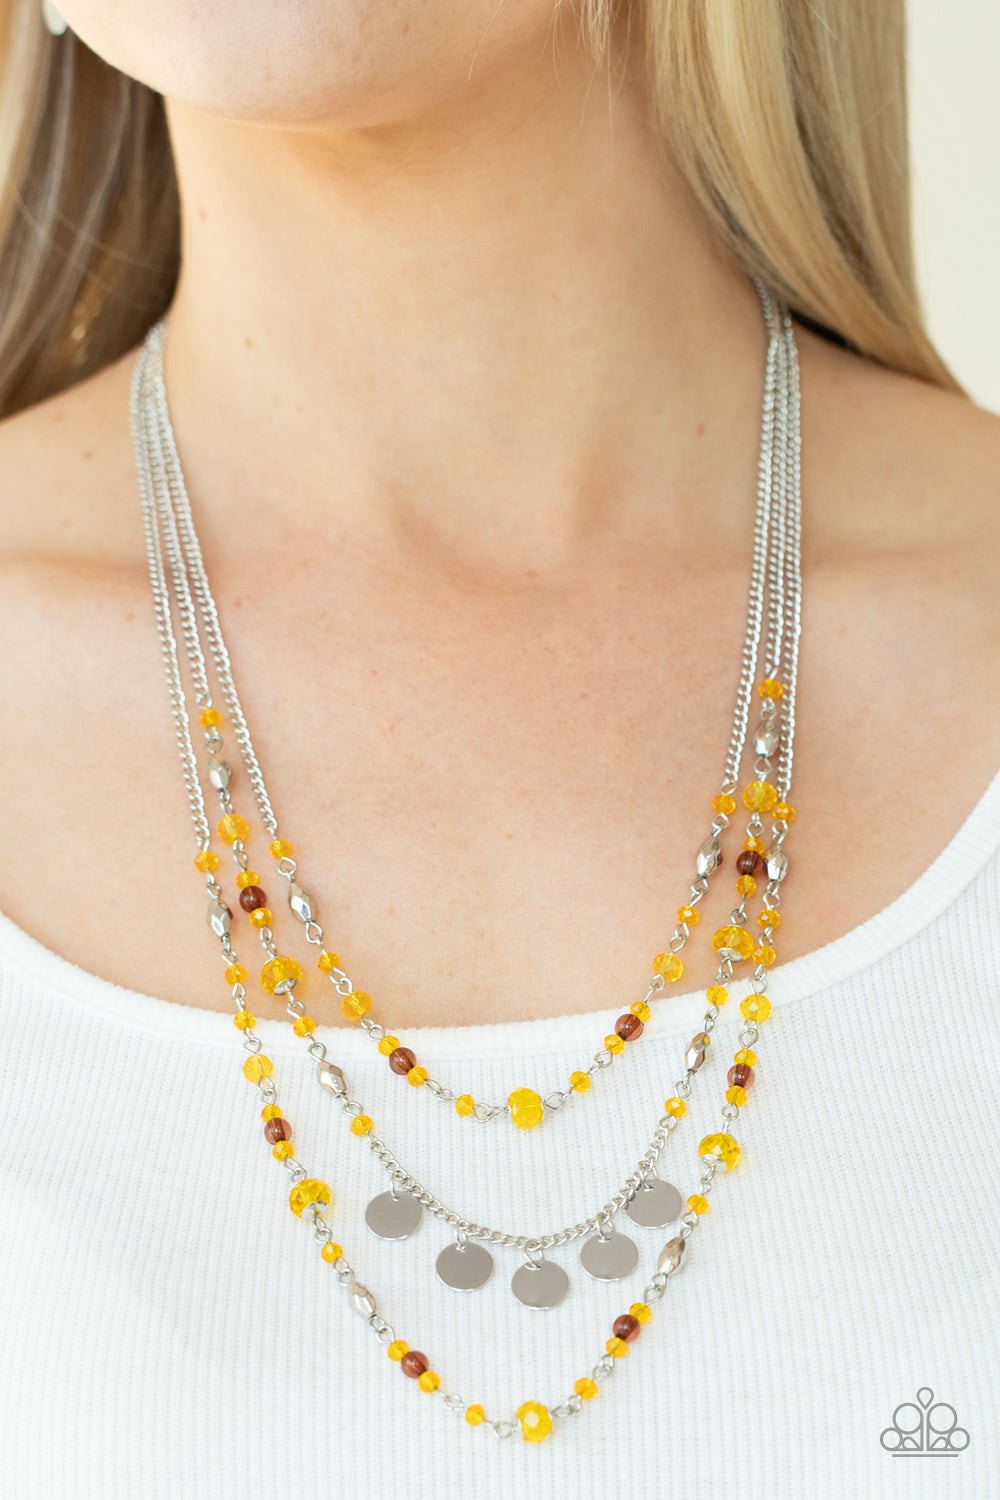 Step Out of My Aura - Yellow - VJ Bedazzled Jewelry